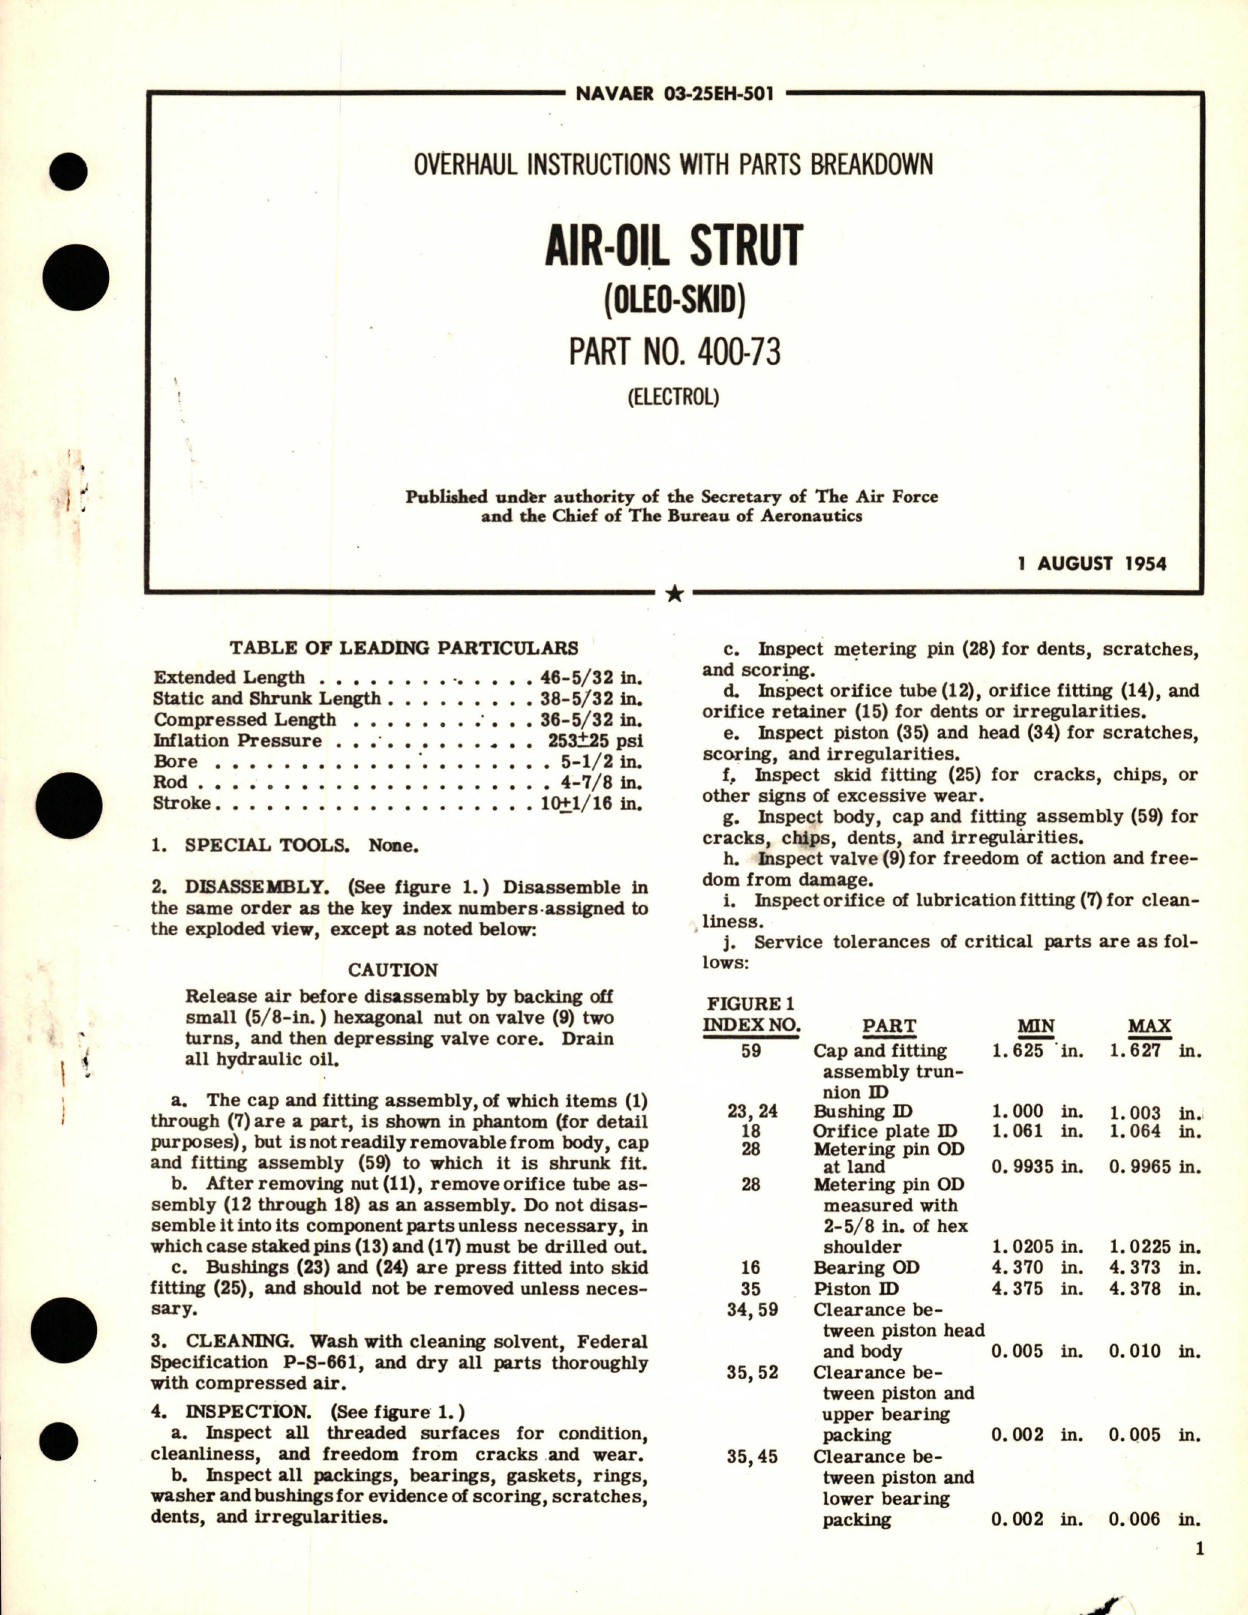 Sample page 1 from AirCorps Library document: Overhaul Instructions with Parts Breakdown for Air-Oil Strut (Oleo-Skid) - Part 400-73